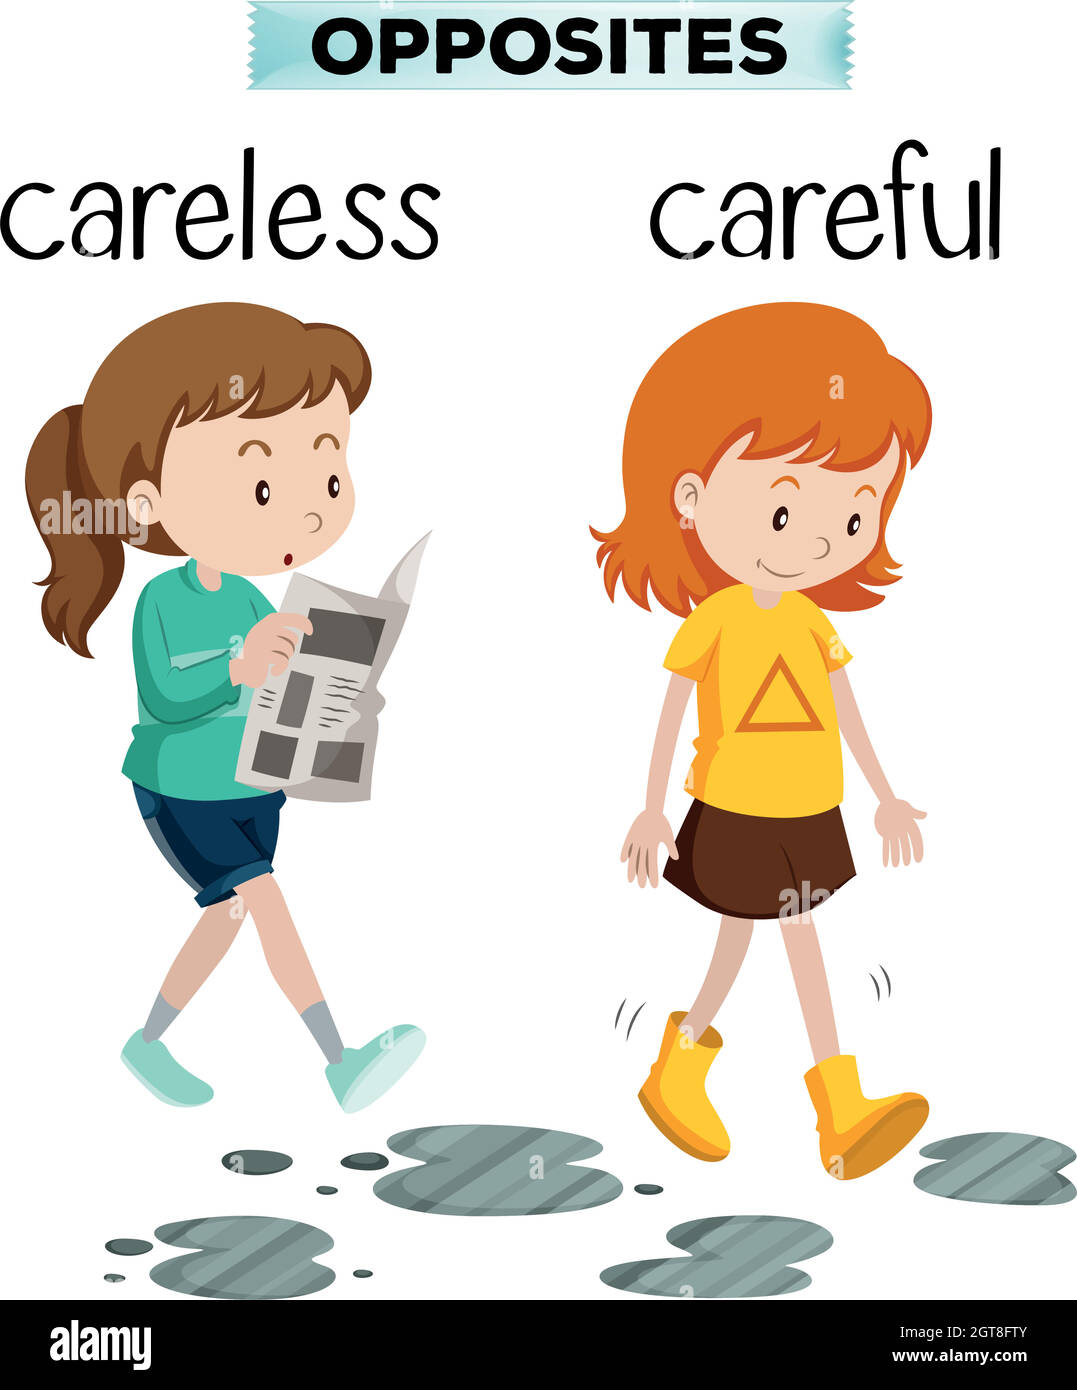 Opposite words for carelss and careful Stock Vector